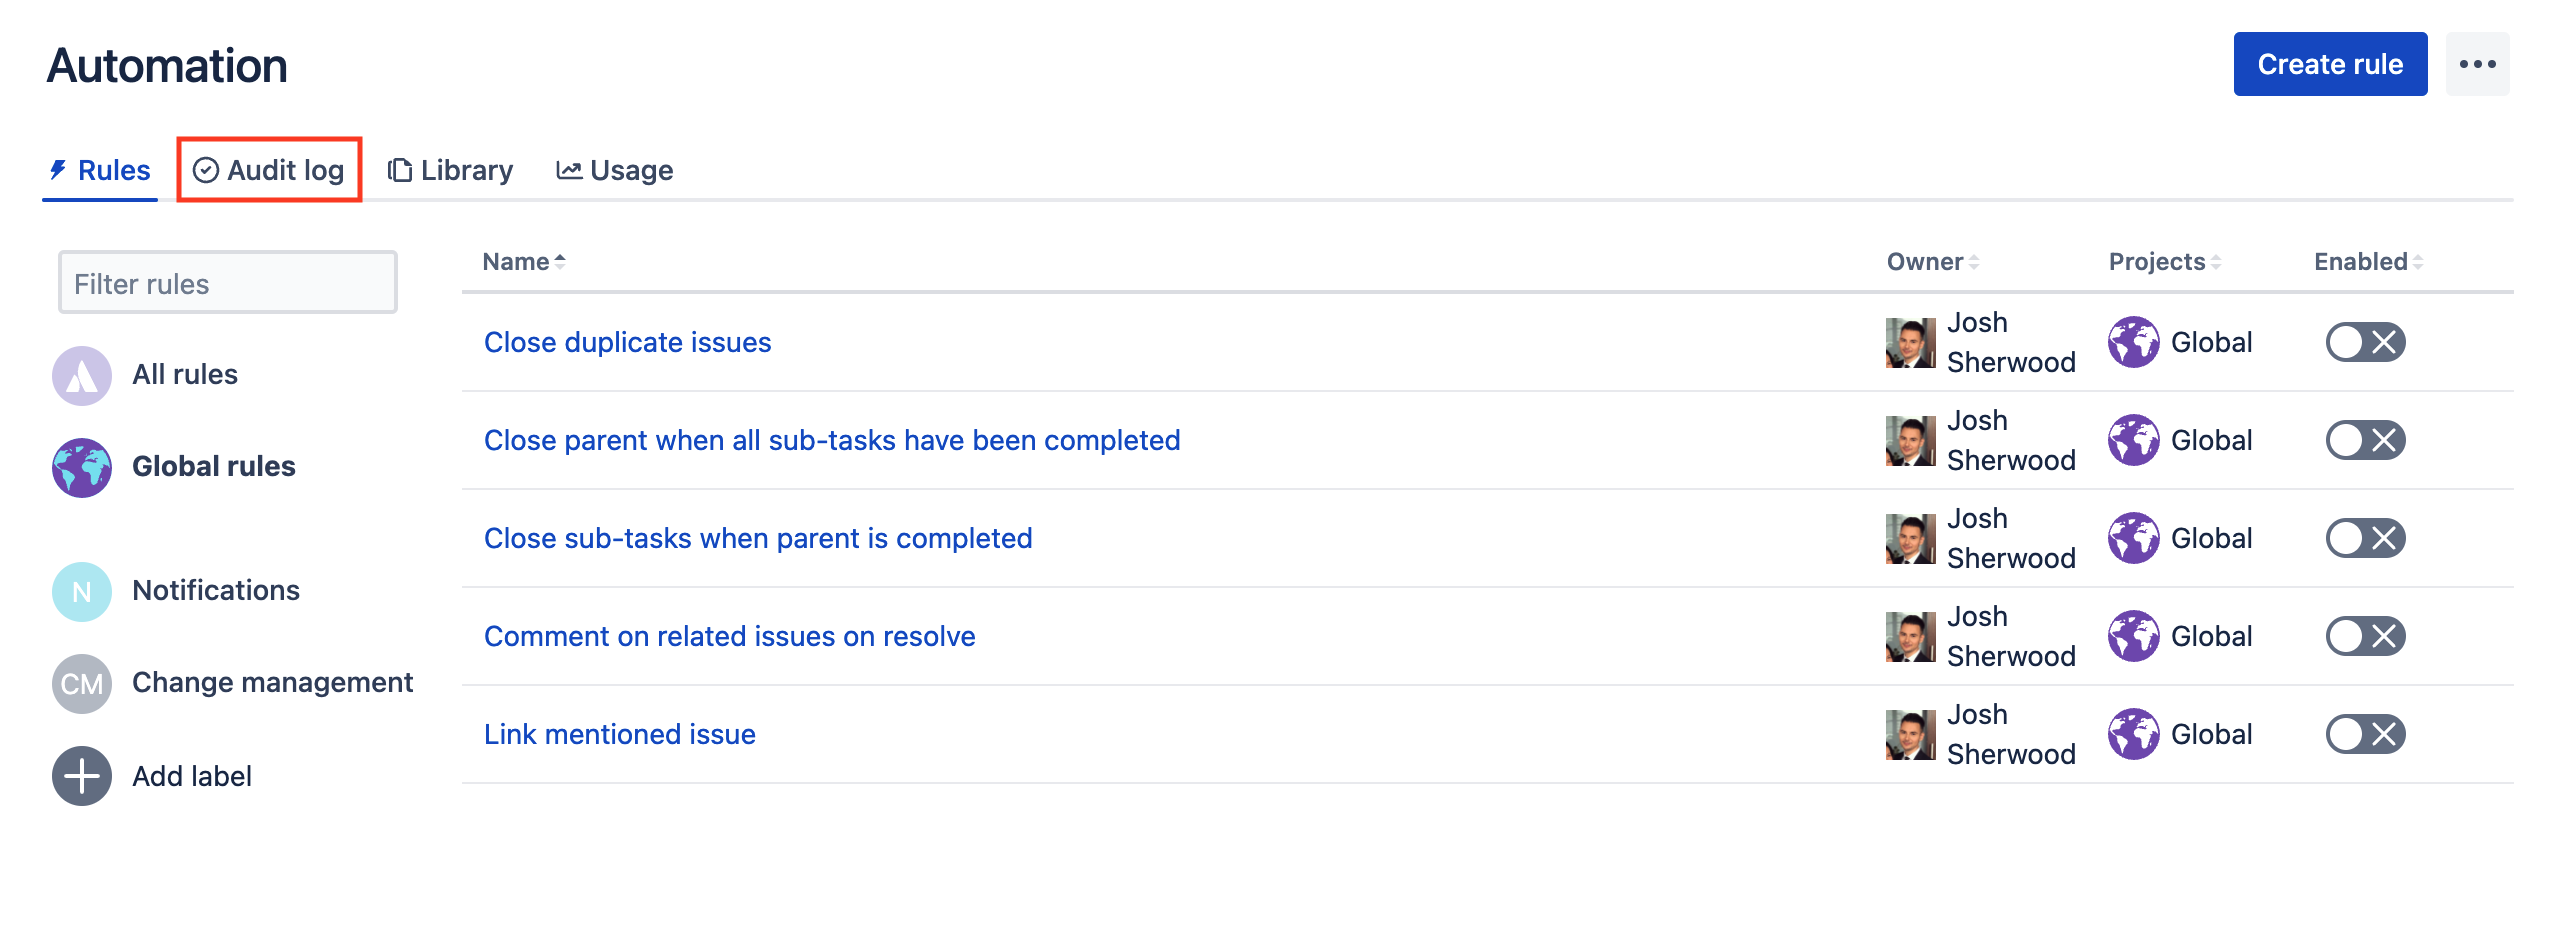 Global automation screen in Jira. "Show audit log" button is highlighted to emphasize its position in the "more" menu.